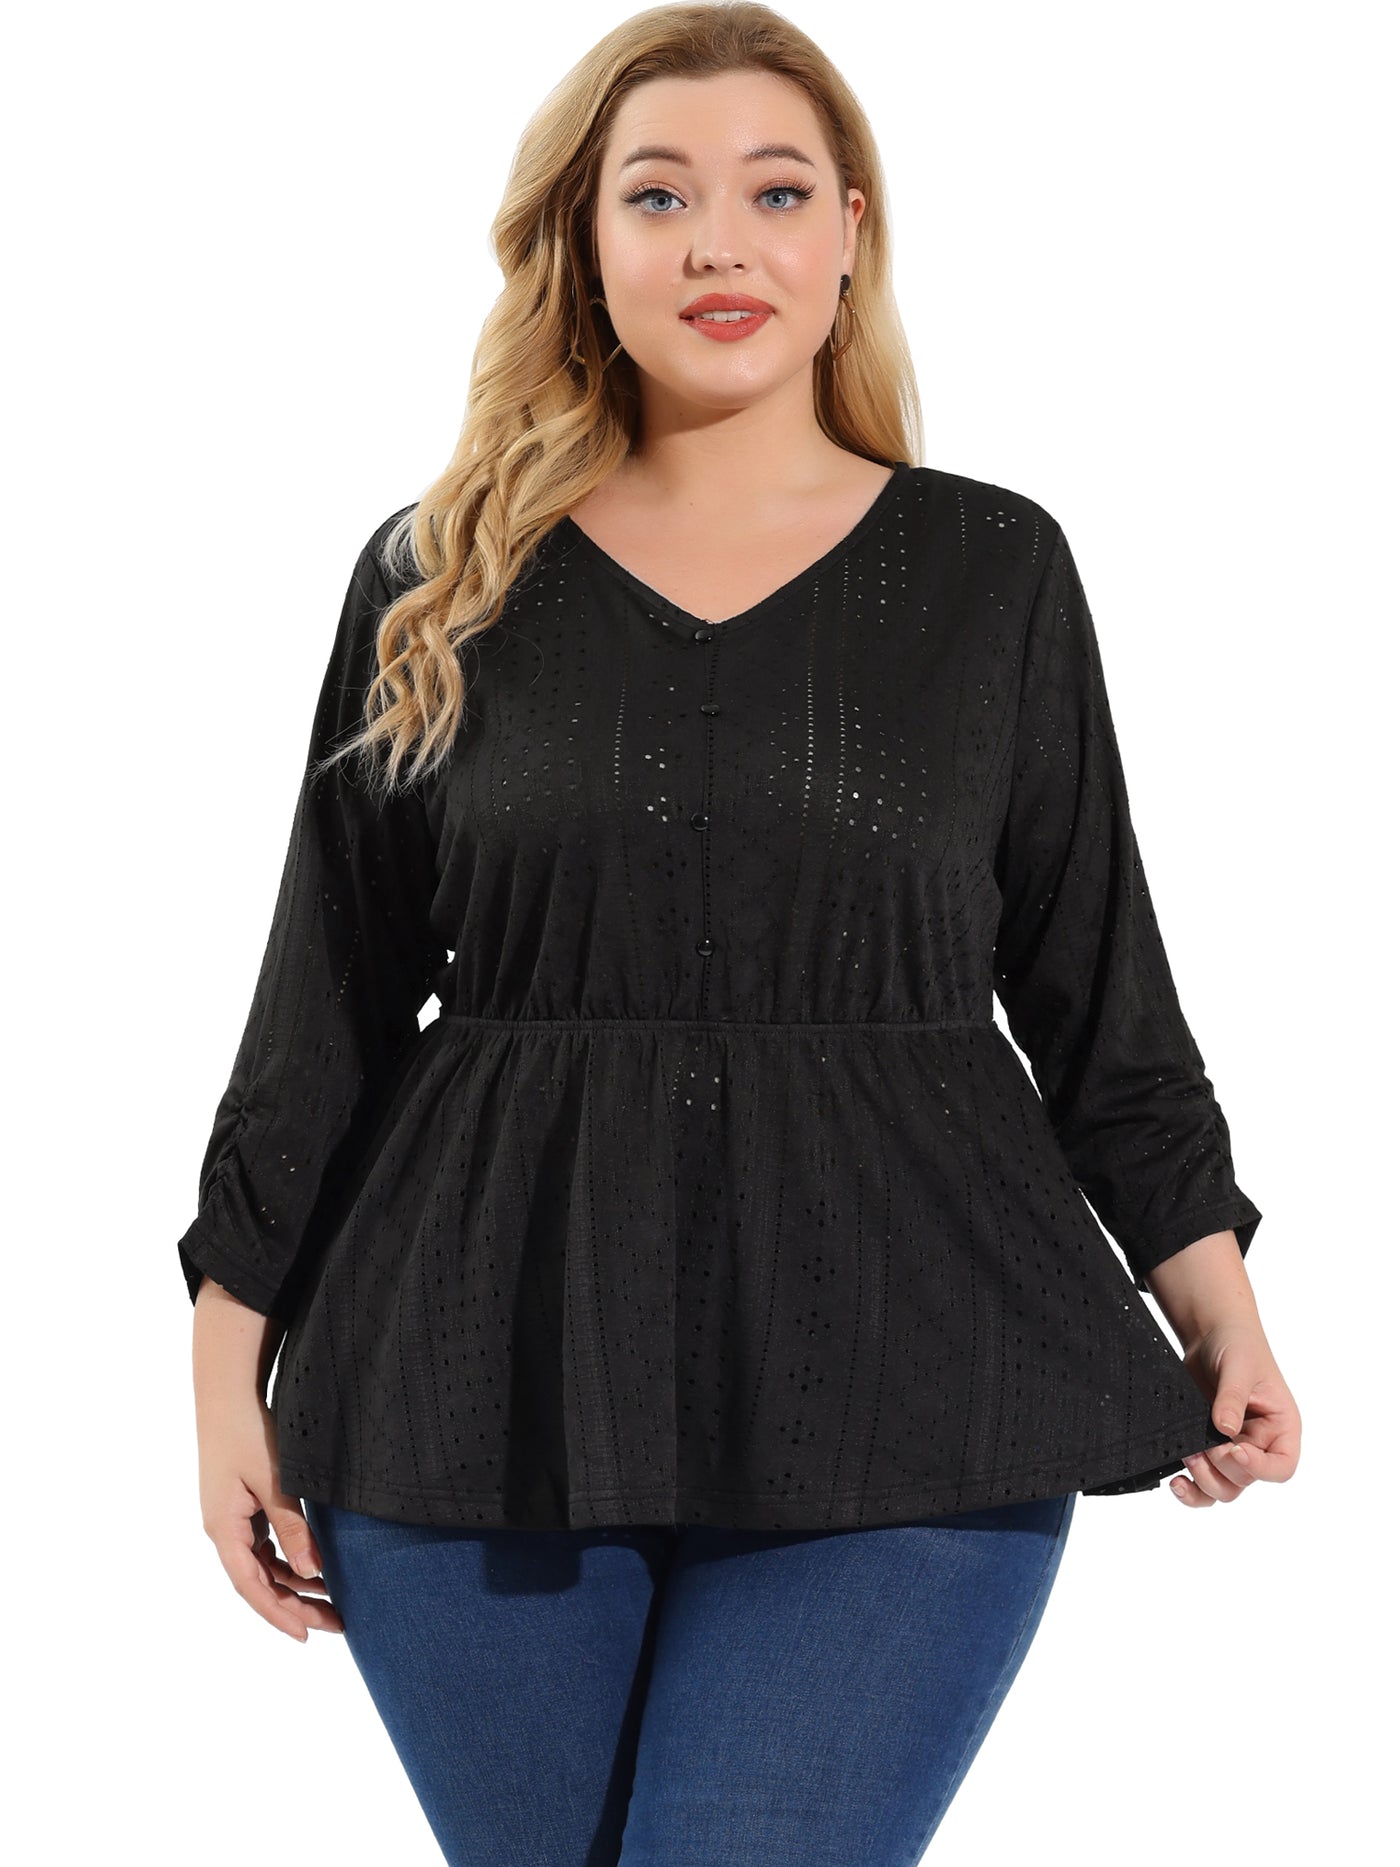 Bublédon Plus Size Blouse 3/4 Ruched Sleeves Ruffle Peplum Blouses